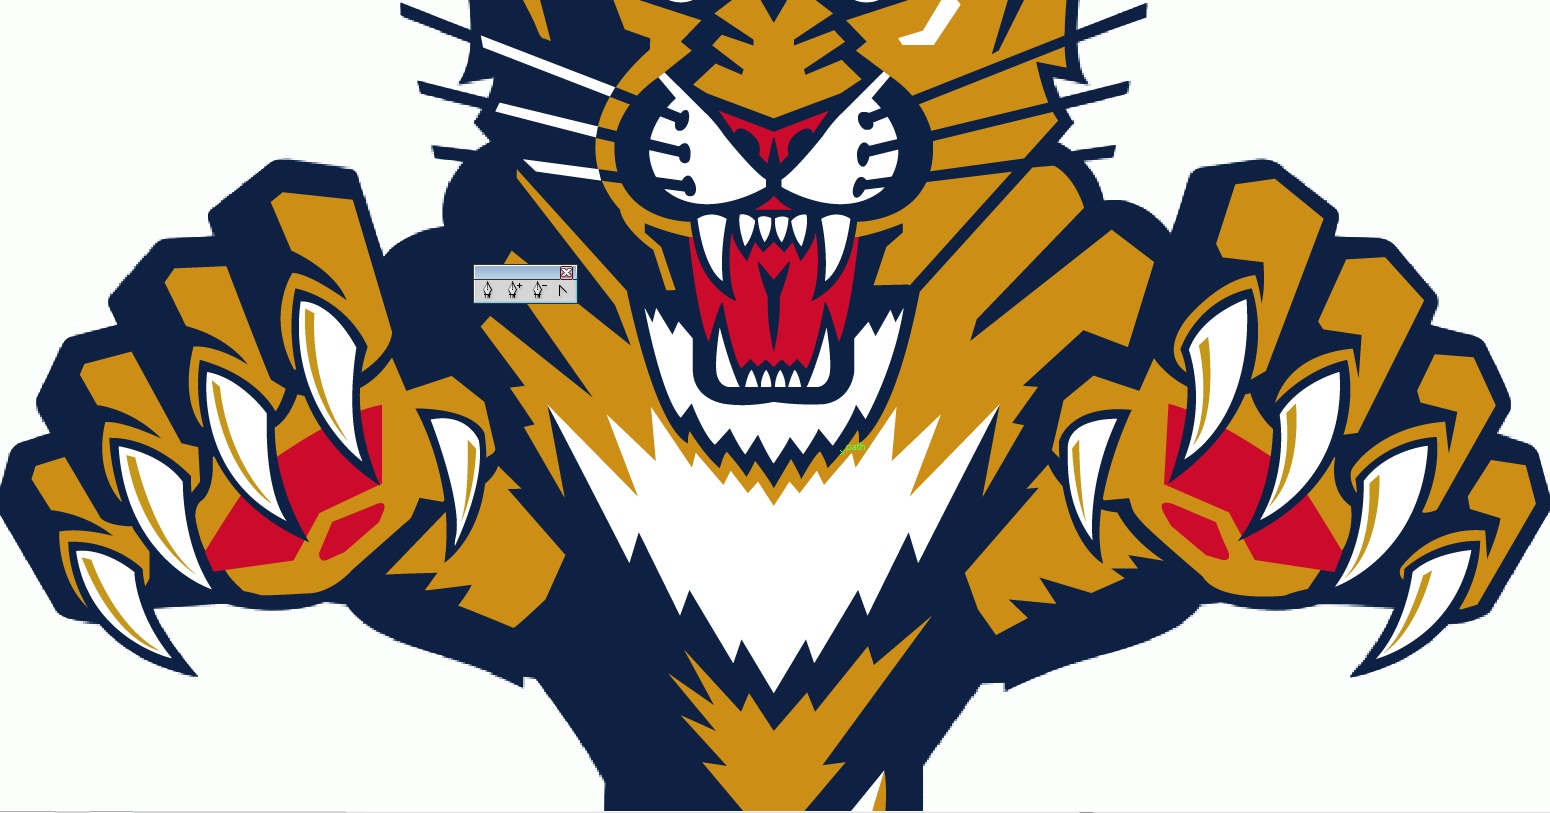 Sports Logo Spot: Florida Panthers, inspired by the Predators